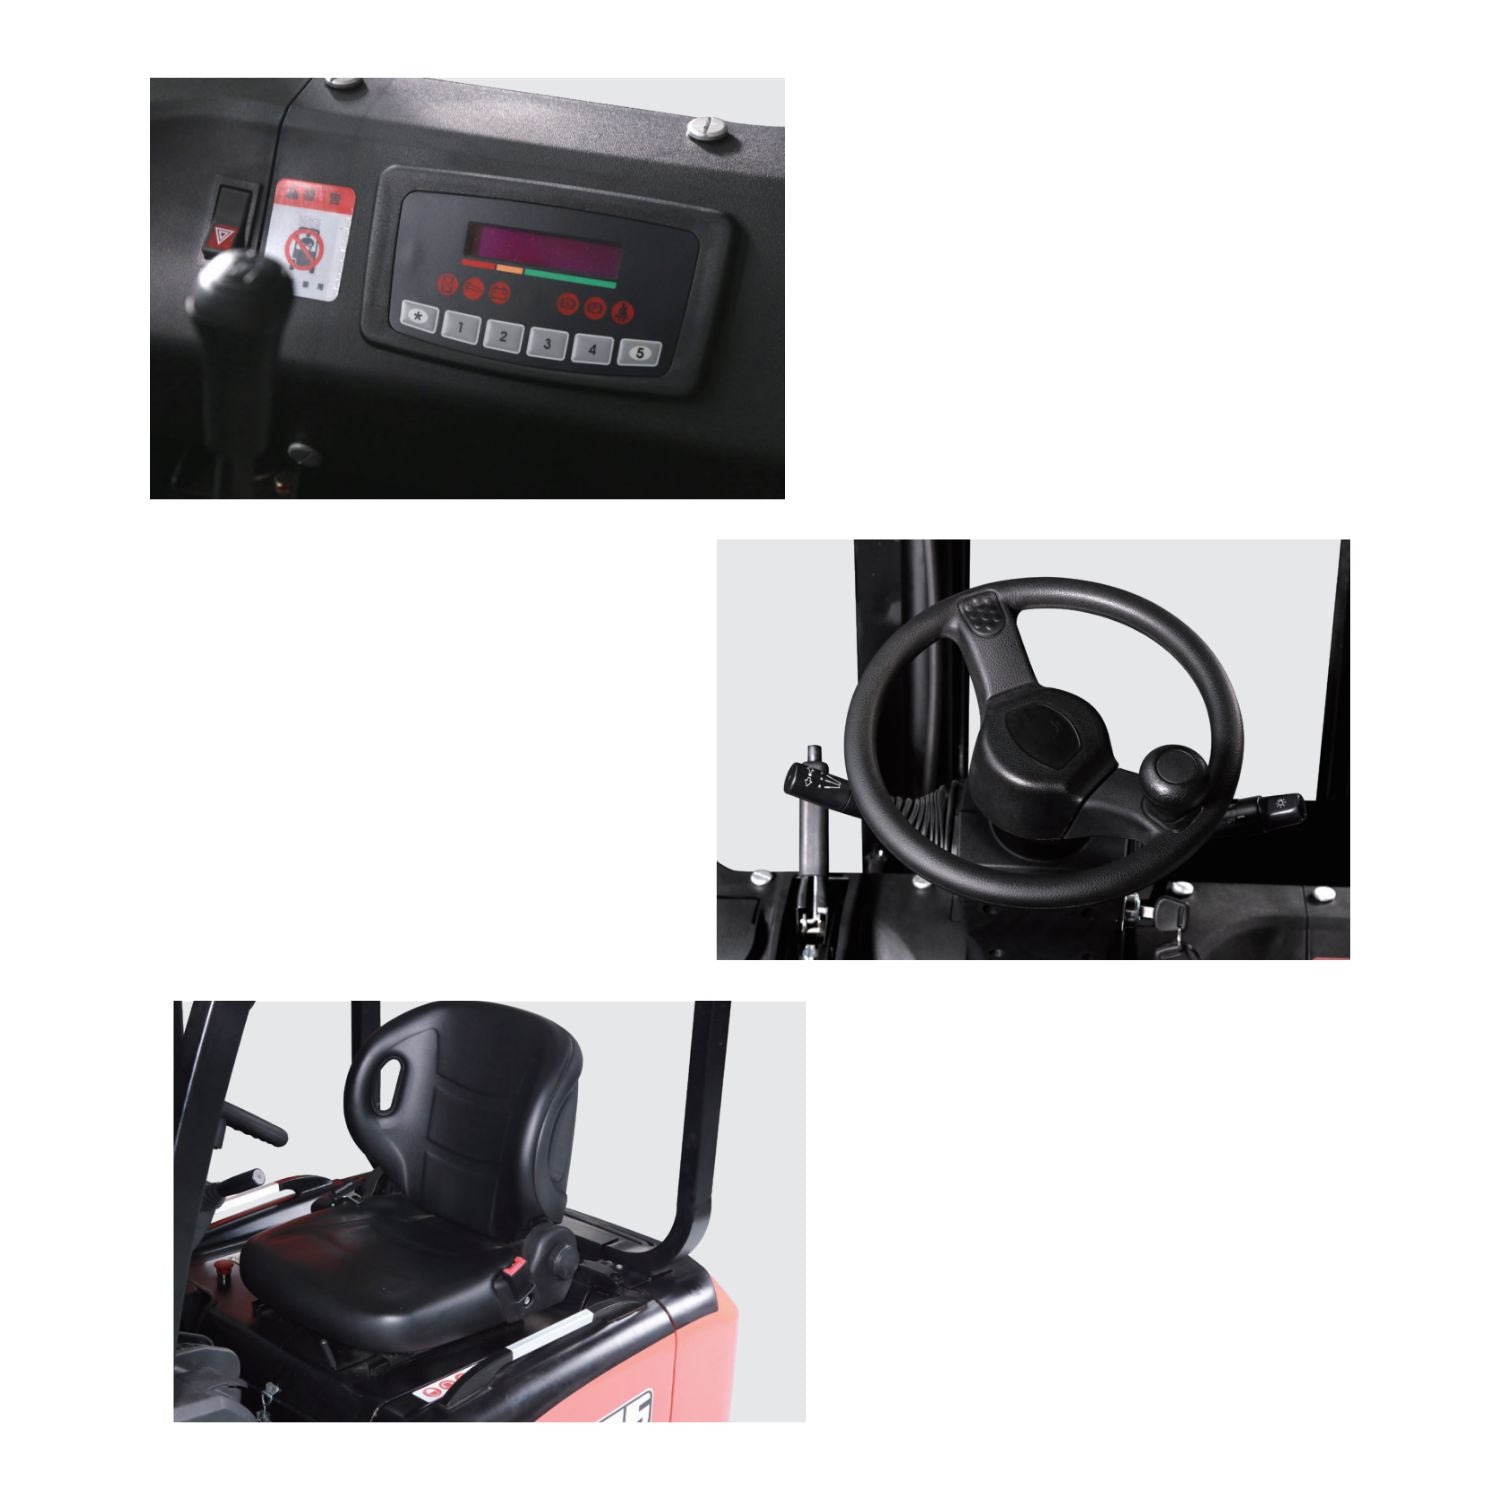 CPD20TV8 electric forklift features